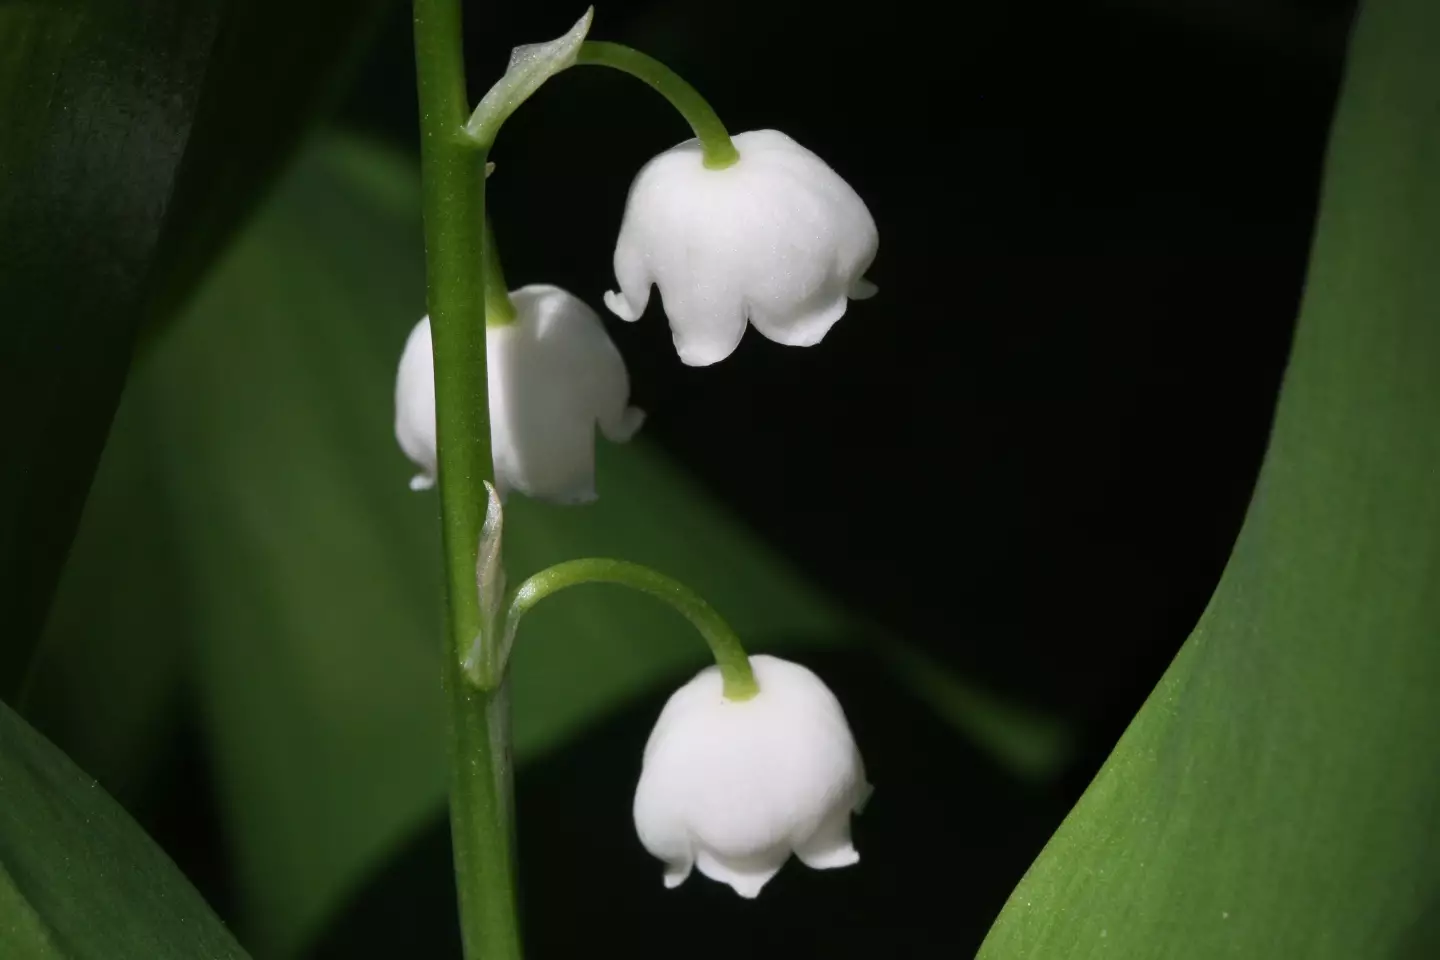 Scheffer had allegedly been adding Lilly of the Valley to her husbands food and drink.